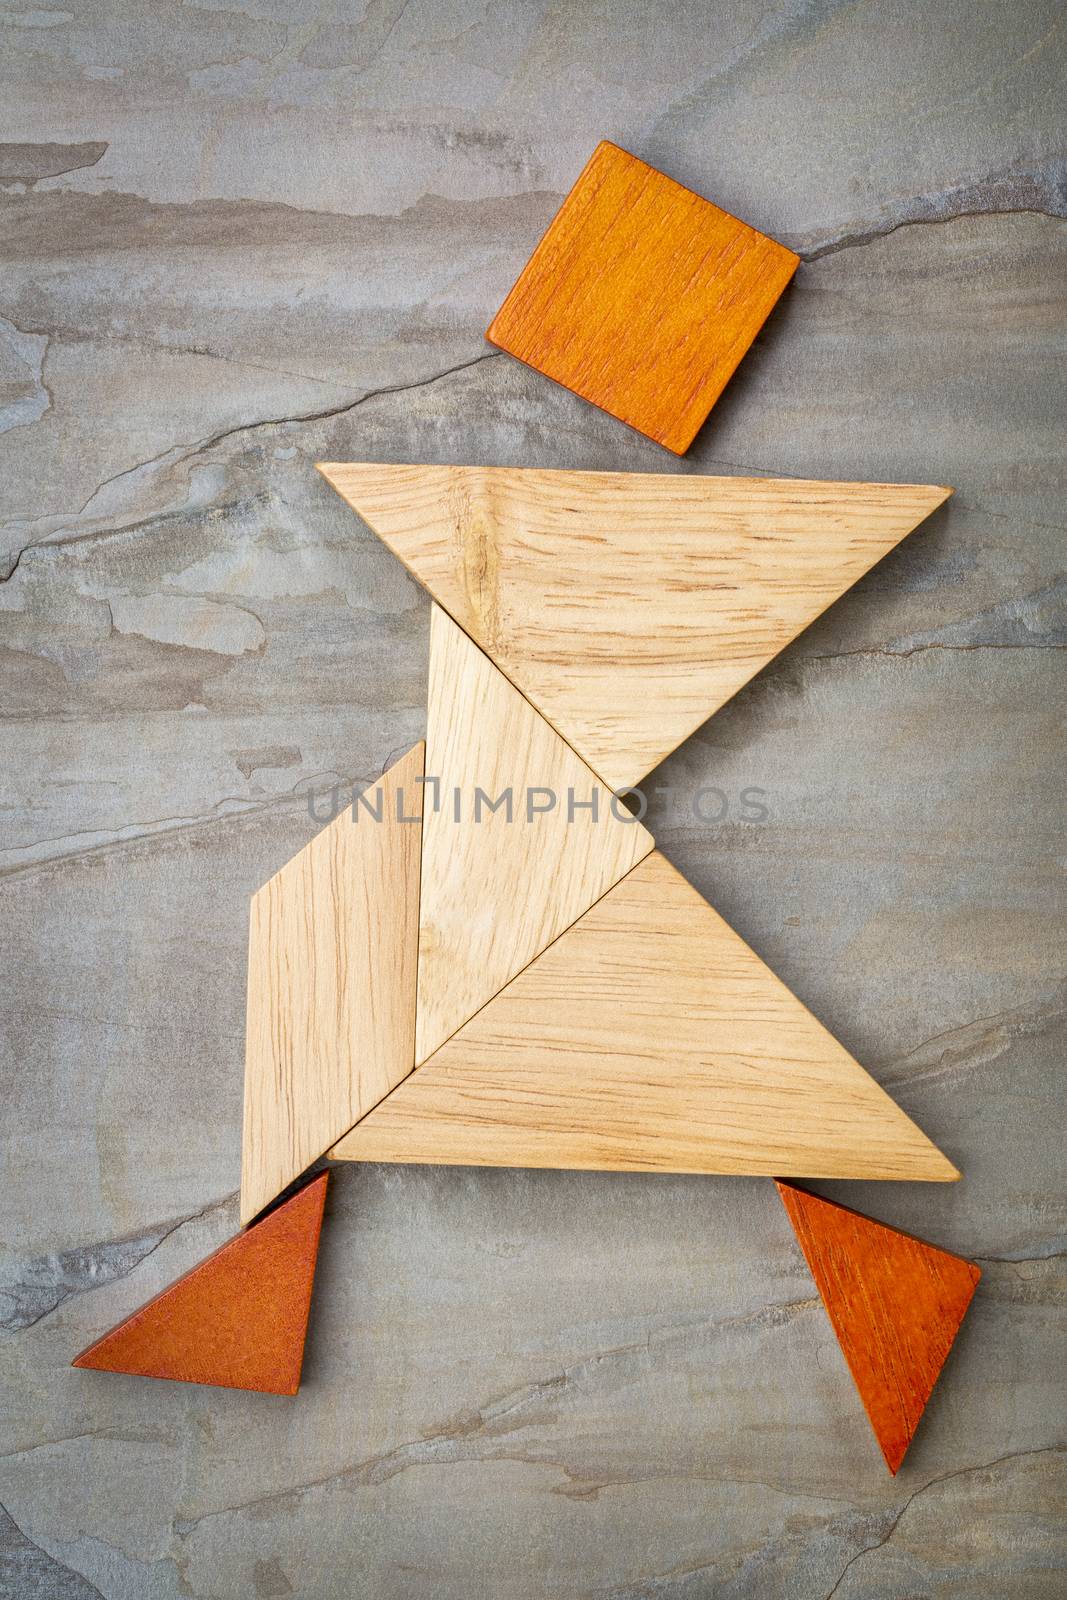 abstract of a dancing or walking figure built from seven tangram wooden pieces, a traditional Chinese puzzle game; slate rock background background, the artwork copyright by the photographer